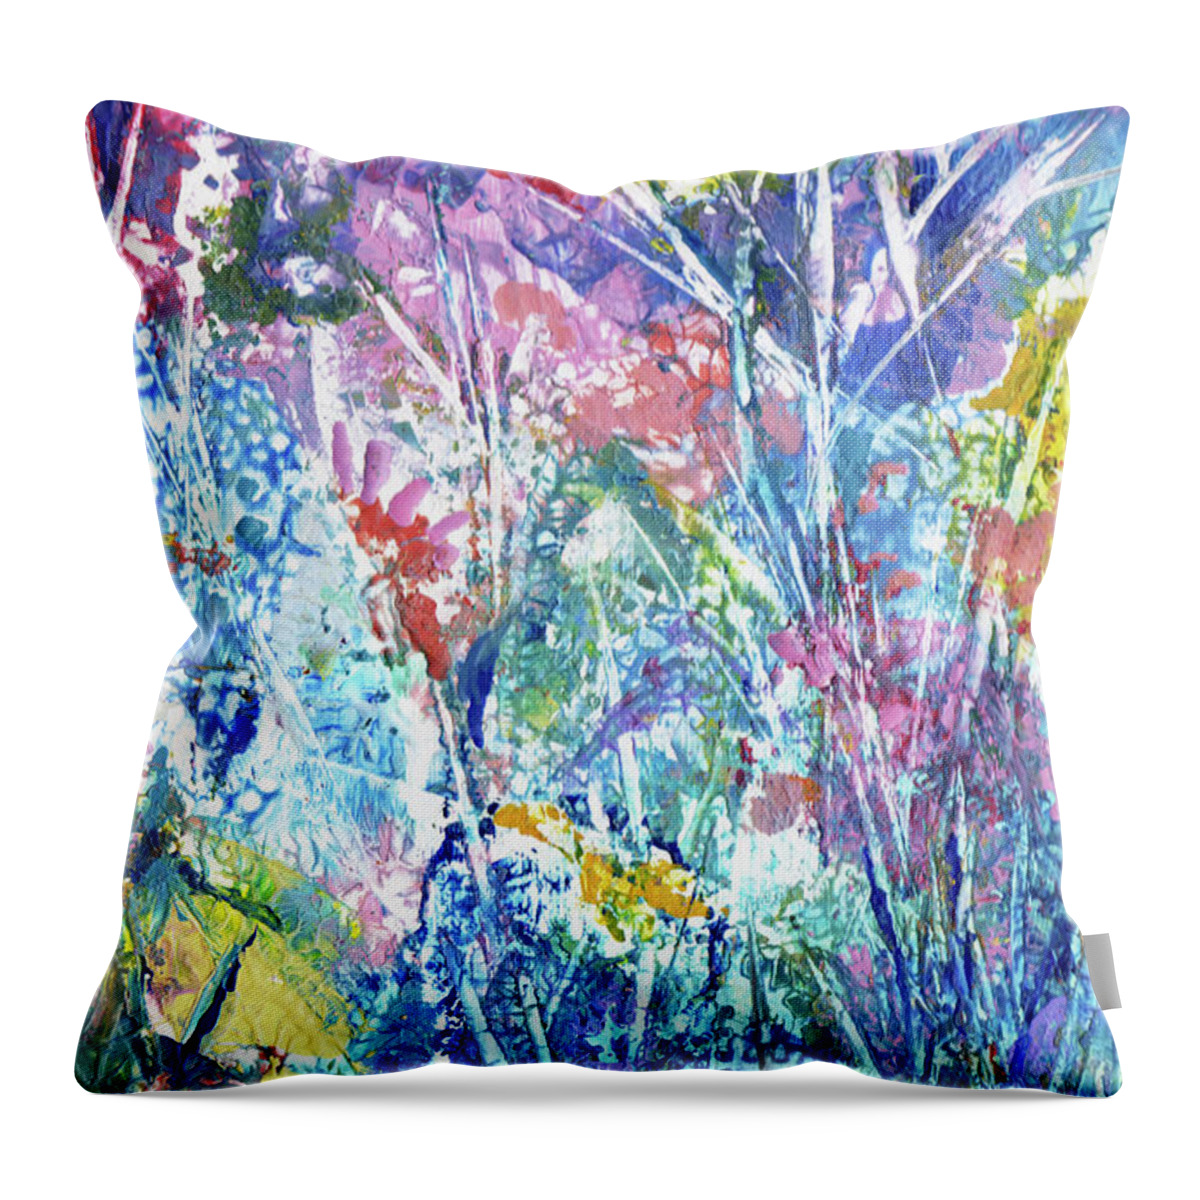 Encaustic Throw Pillow featuring the painting Auttumn Glory by Jean Batzell Fitzgerald